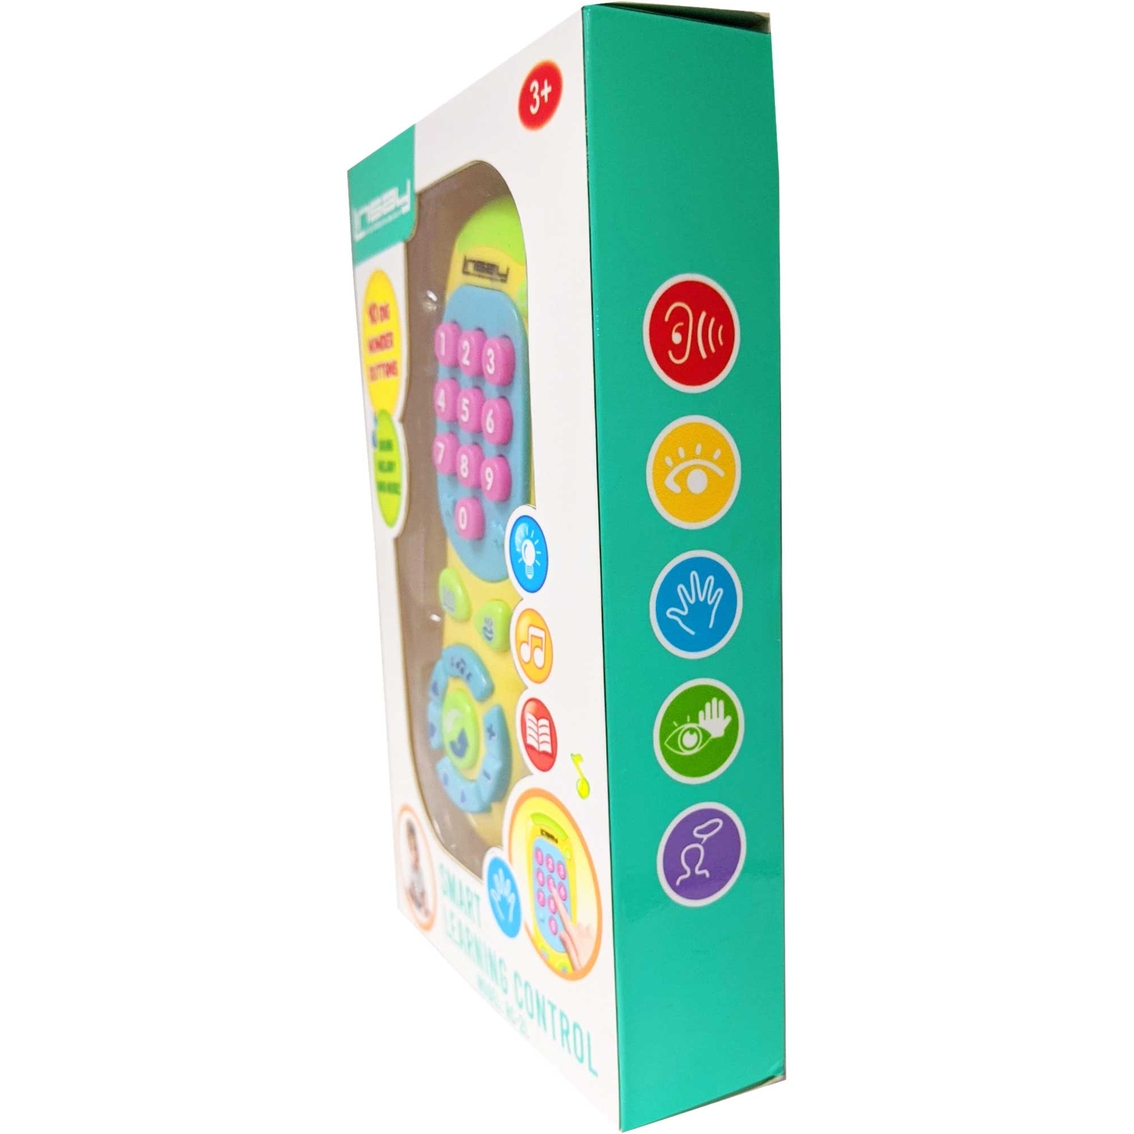 Linsay Smart Toys Learning TV Remote Control - Image 2 of 4